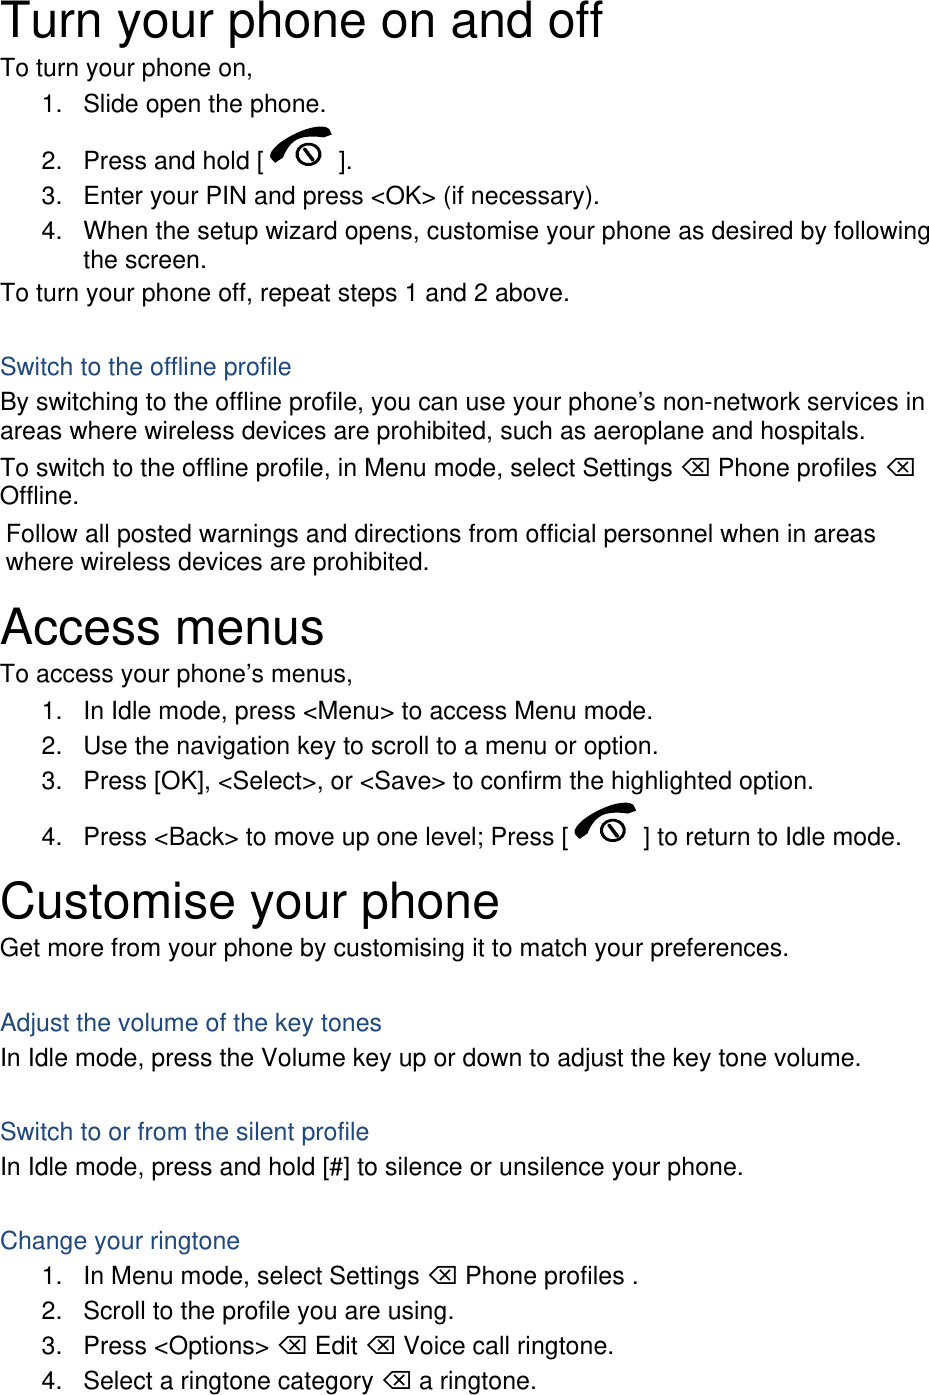 Turn your phone on and off To turn your phone on, 1.  Slide open the phone. 2.  Press and hold [ ]. 3.  Enter your PIN and press &lt;OK&gt; (if necessary). 4.  When the setup wizard opens, customise your phone as desired by following the screen. To turn your phone off, repeat steps 1 and 2 above.  Switch to the offline profile By switching to the offline profile, you can use your phone’s non-network services in areas where wireless devices are prohibited, such as aeroplane and hospitals. To switch to the offline profile, in Menu mode, select Settings  Phone profiles  Offline. Follow all posted warnings and directions from official personnel when in areas where wireless devices are prohibited. Access menus To access your phone’s menus, 1.  In Idle mode, press &lt;Menu&gt; to access Menu mode. 2.  Use the navigation key to scroll to a menu or option. 3.  Press [OK], &lt;Select&gt;, or &lt;Save&gt; to confirm the highlighted option. 4.  Press &lt;Back&gt; to move up one level; Press [ ] to return to Idle mode. Customise your phone Get more from your phone by customising it to match your preferences.  Adjust the volume of the key tones In Idle mode, press the Volume key up or down to adjust the key tone volume.  Switch to or from the silent profile In Idle mode, press and hold [#] to silence or unsilence your phone.  Change your ringtone 1.  In Menu mode, select Settings  Phone profiles . 2.  Scroll to the profile you are using. 3. Press &lt;Options&gt;  Edit  Voice call ringtone. 4.  Select a ringtone category  a ringtone. 